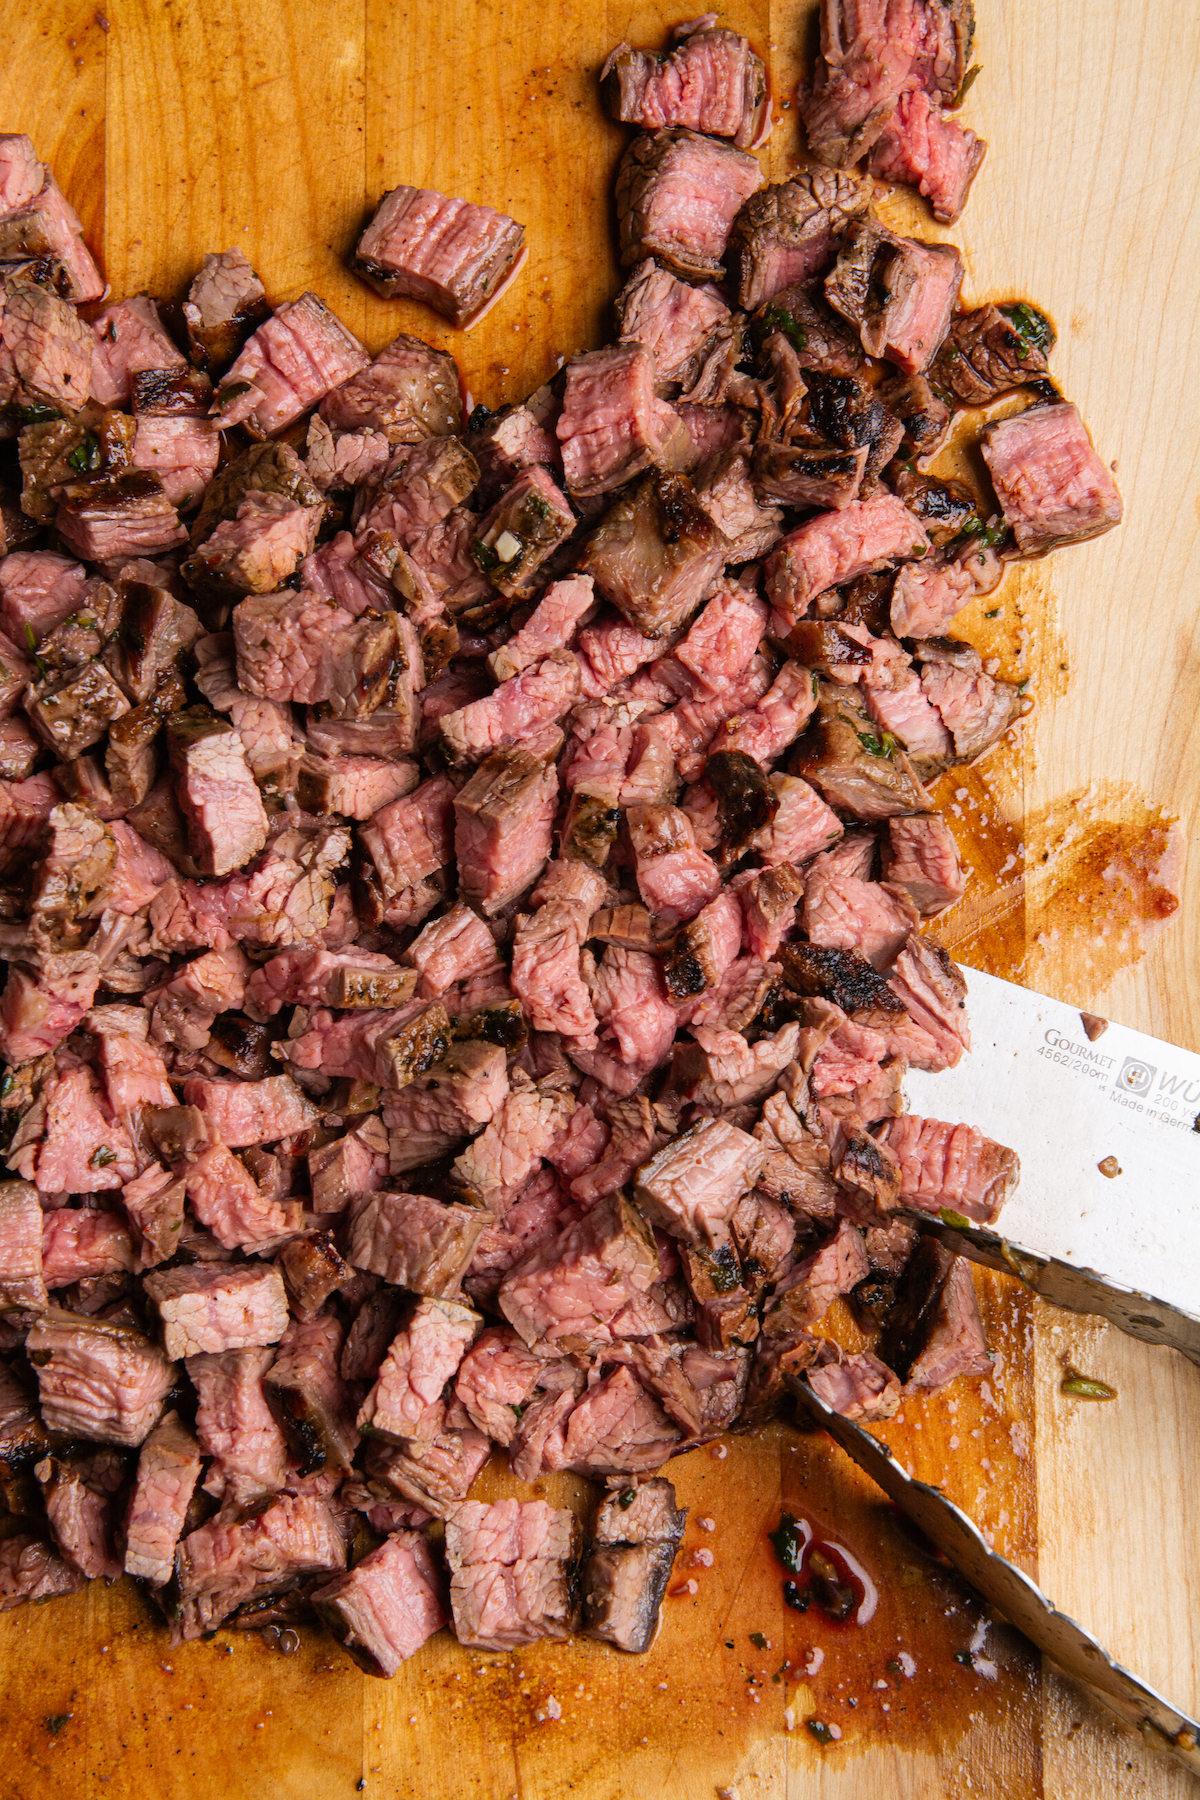 Grilled flank steak or carne asada chopped into smaller pieces on a wooden cutting board.